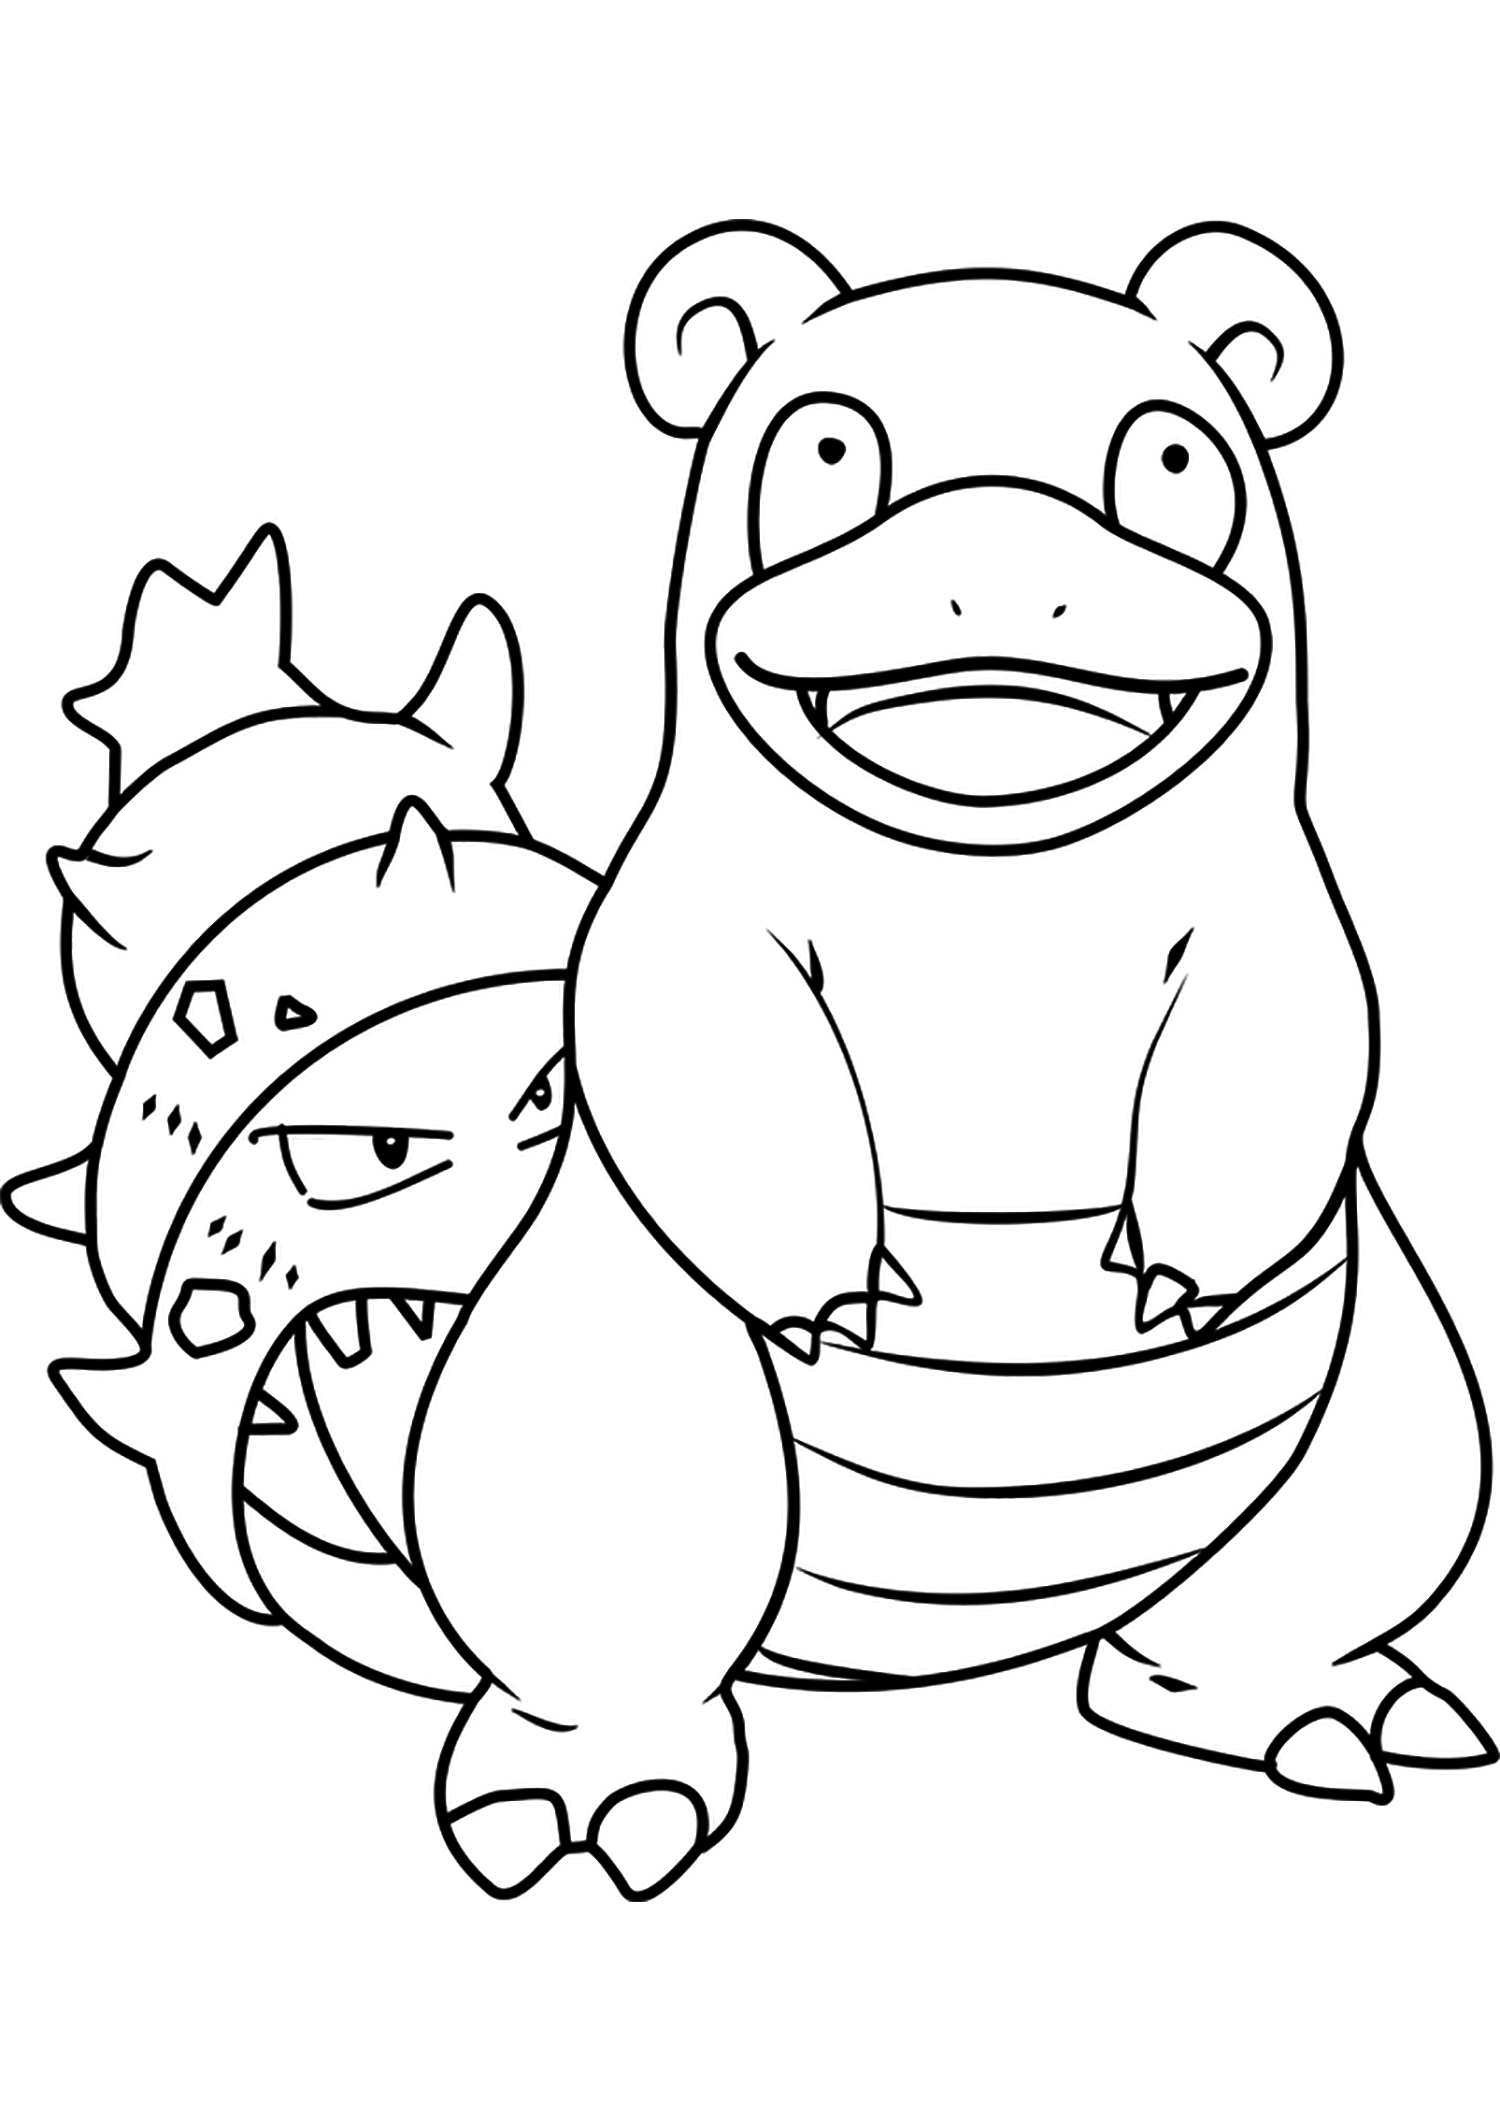 Slowbro (No.80). Slowbro Coloring page, Generation I Pokemon of type Water and PsychicOriginal image credit: Pokemon linearts by Lilly Gerbil on Deviantart.Permission:  All rights reserved © Pokemon company and Ken Sugimori.